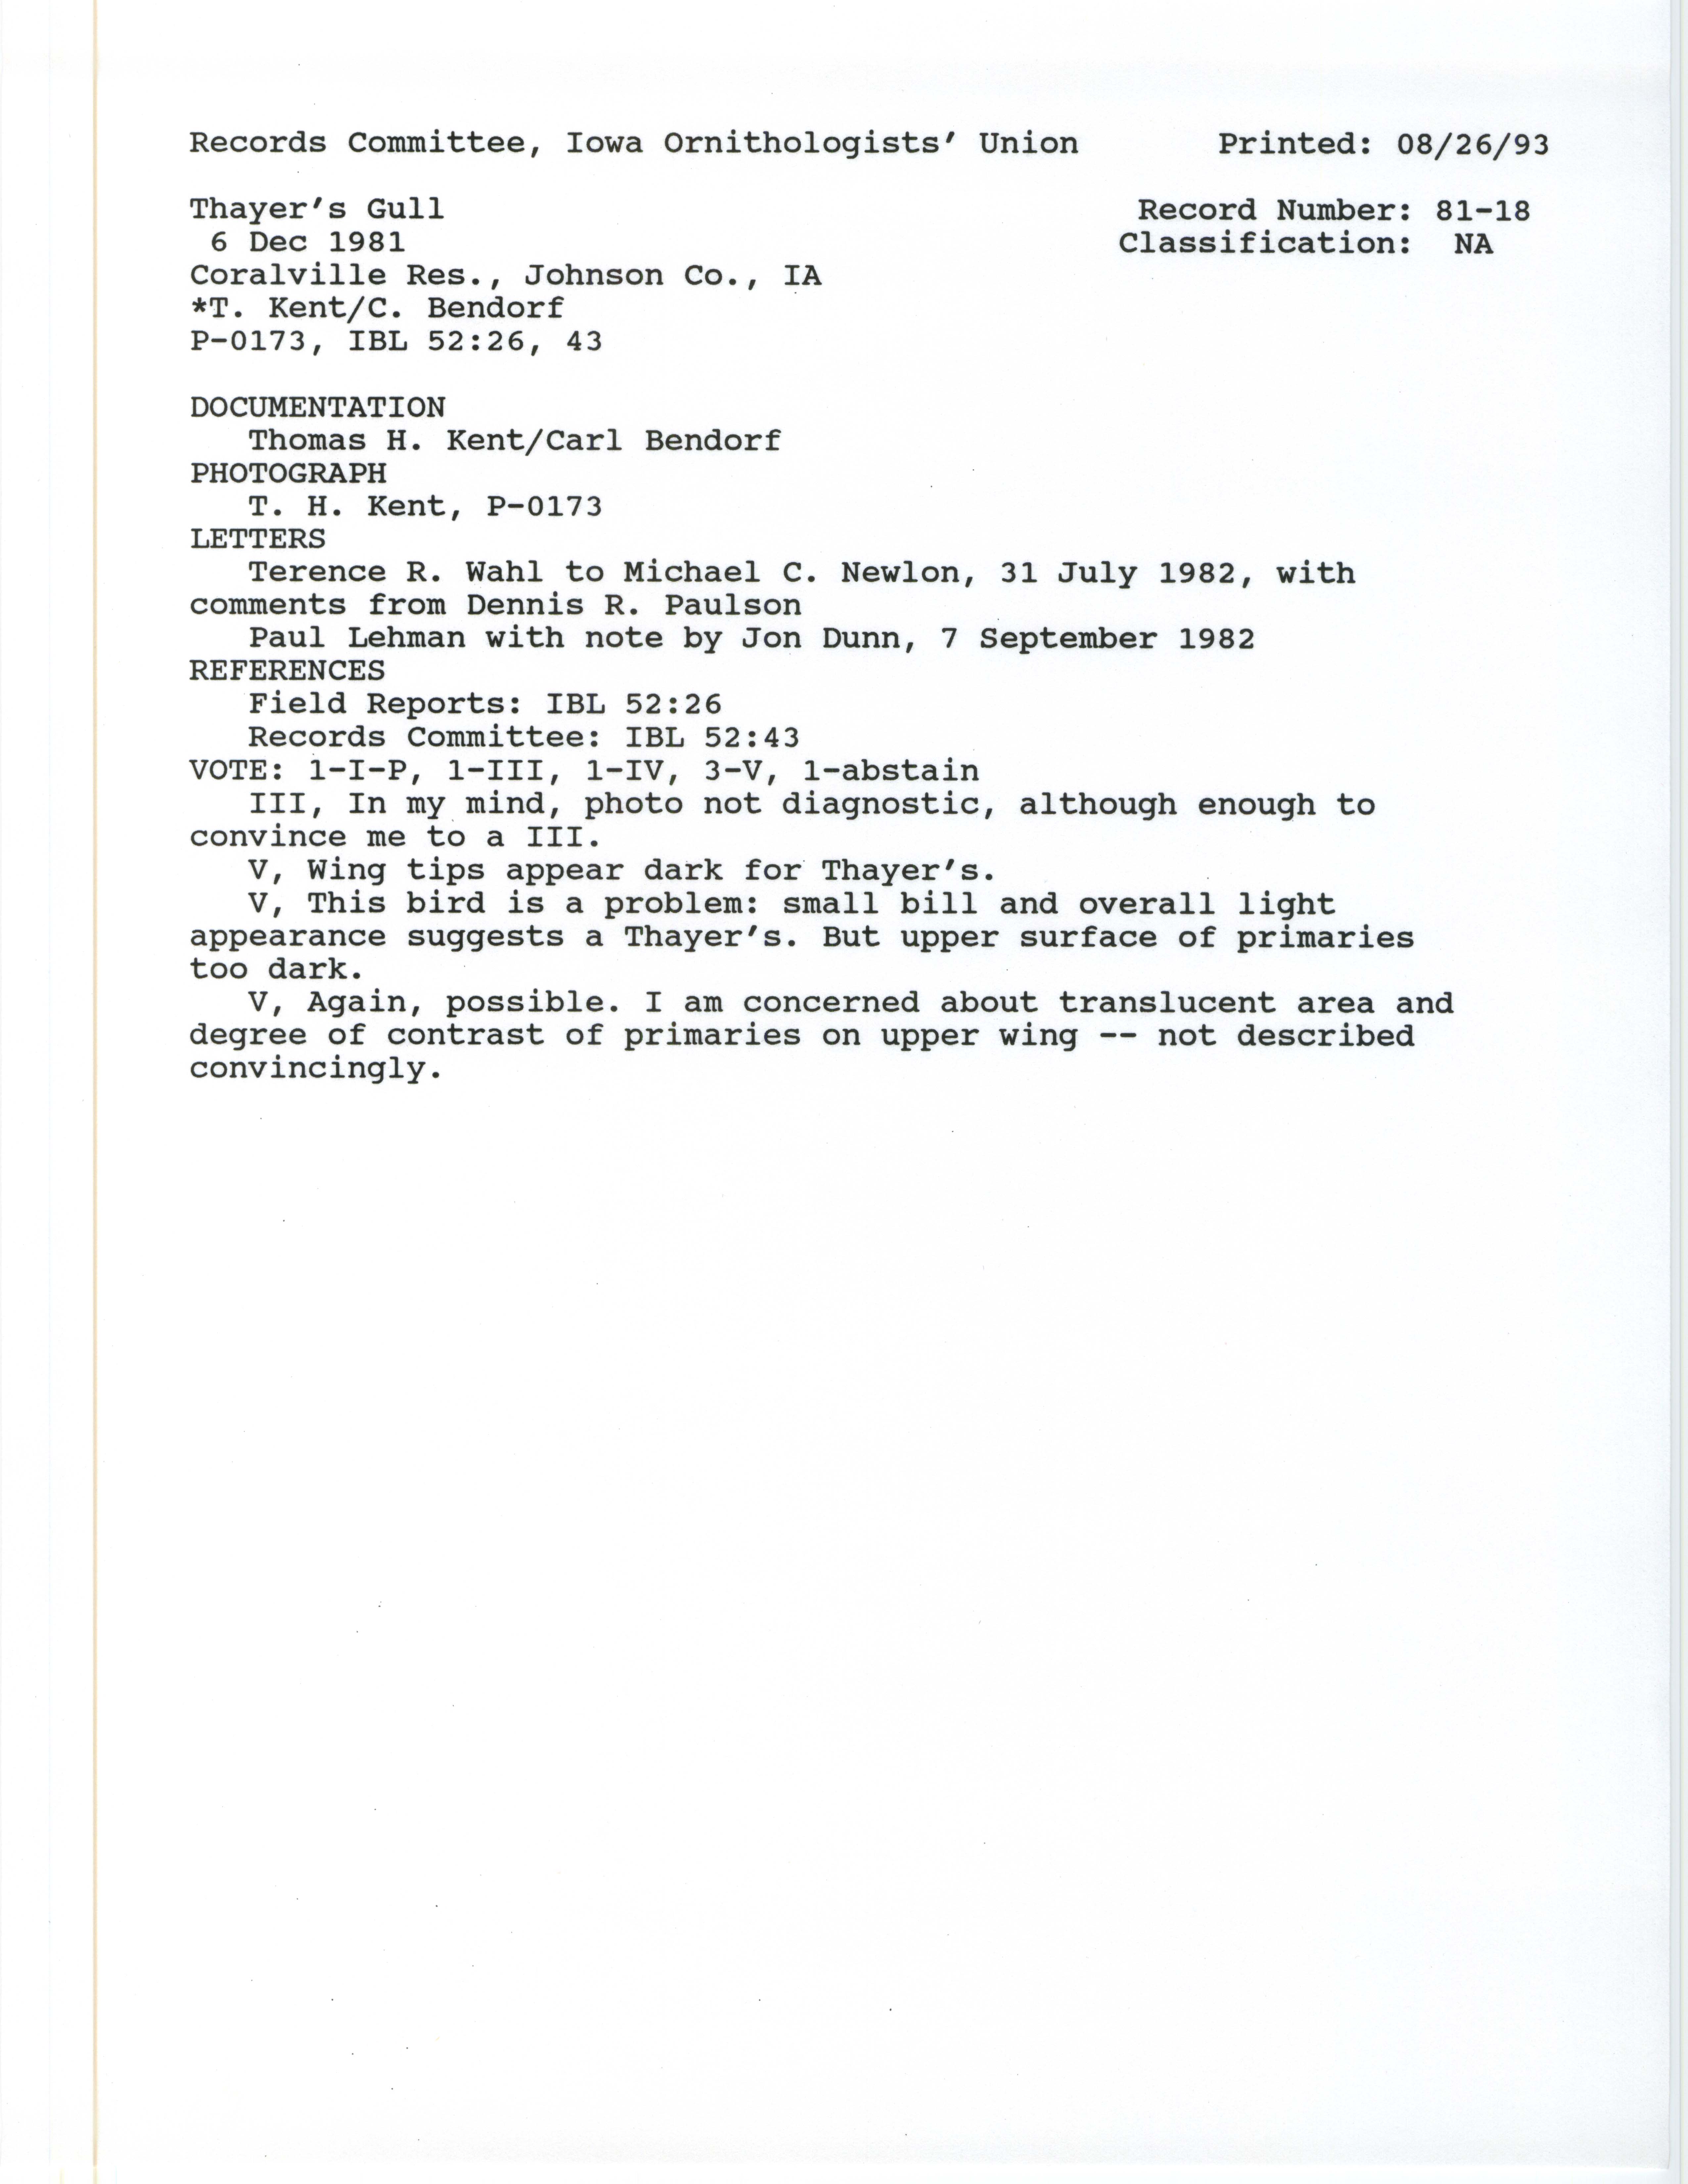 Records Committee review for rare bird sighting of Thayer's Gull at Coralville Dam, 1981